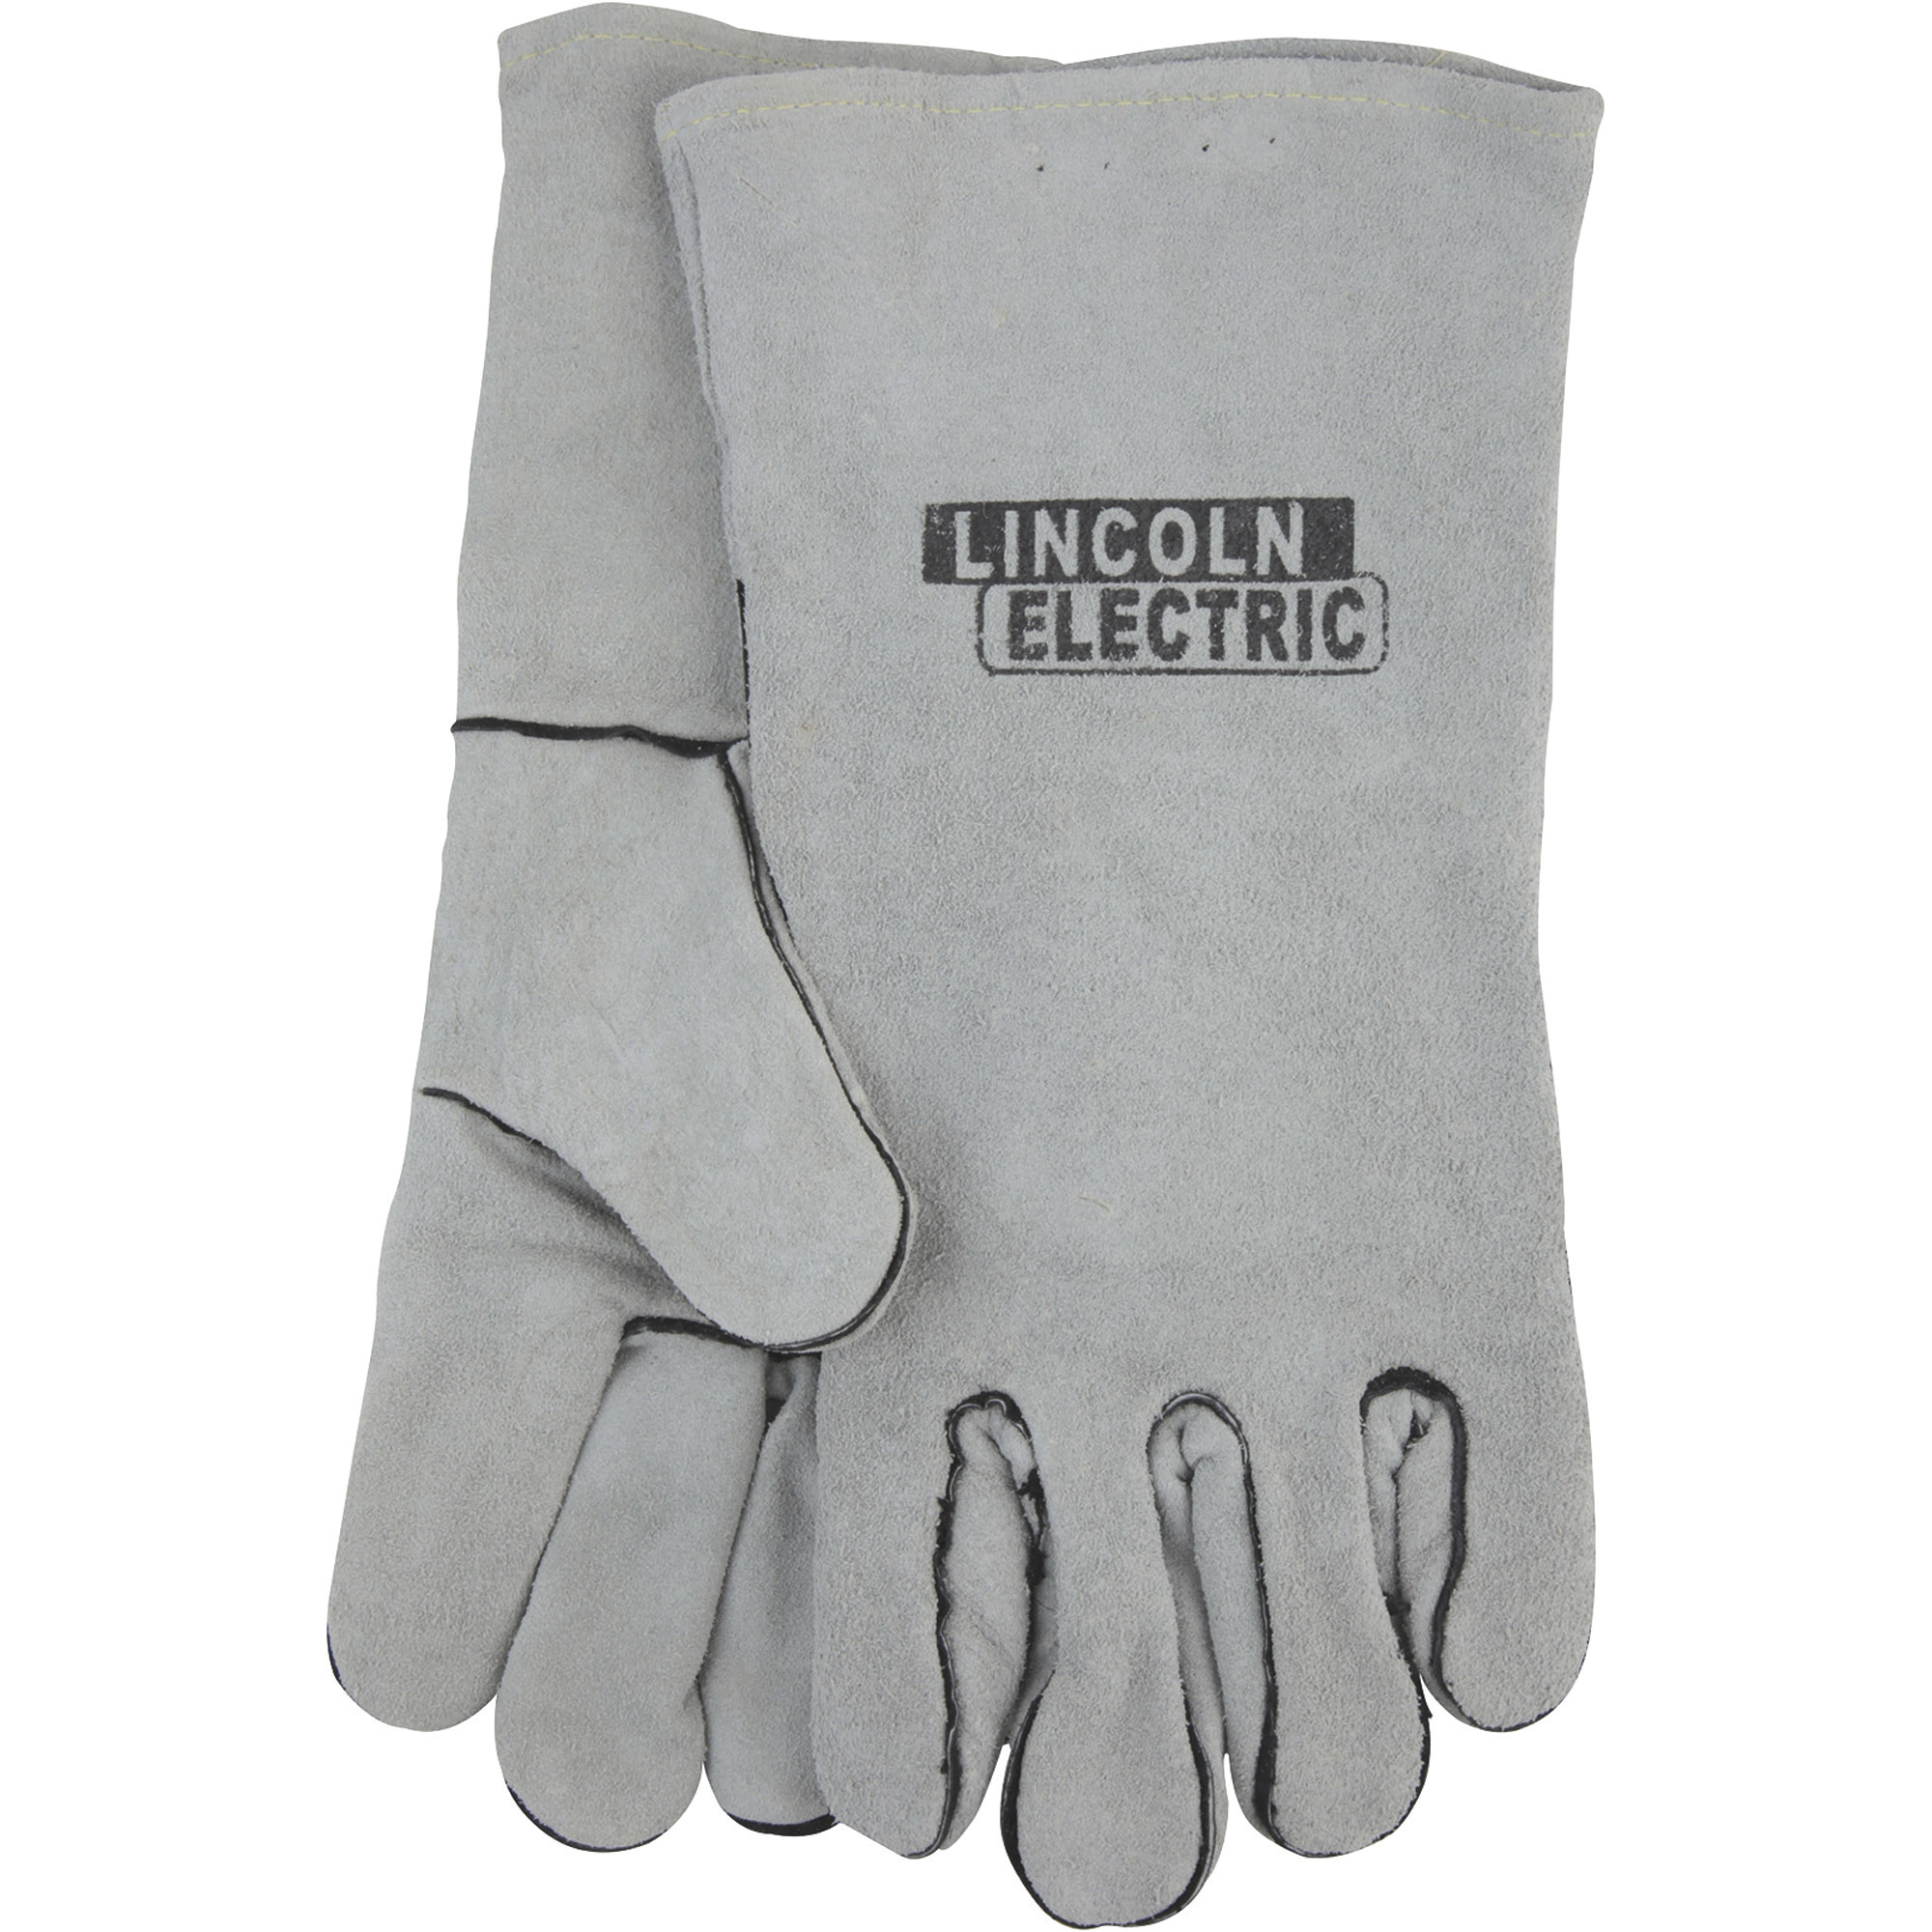 Cloth-Lined Leather Welding Gloves — Gray, One Size Fits Most, Model - Lincoln Electric KH641